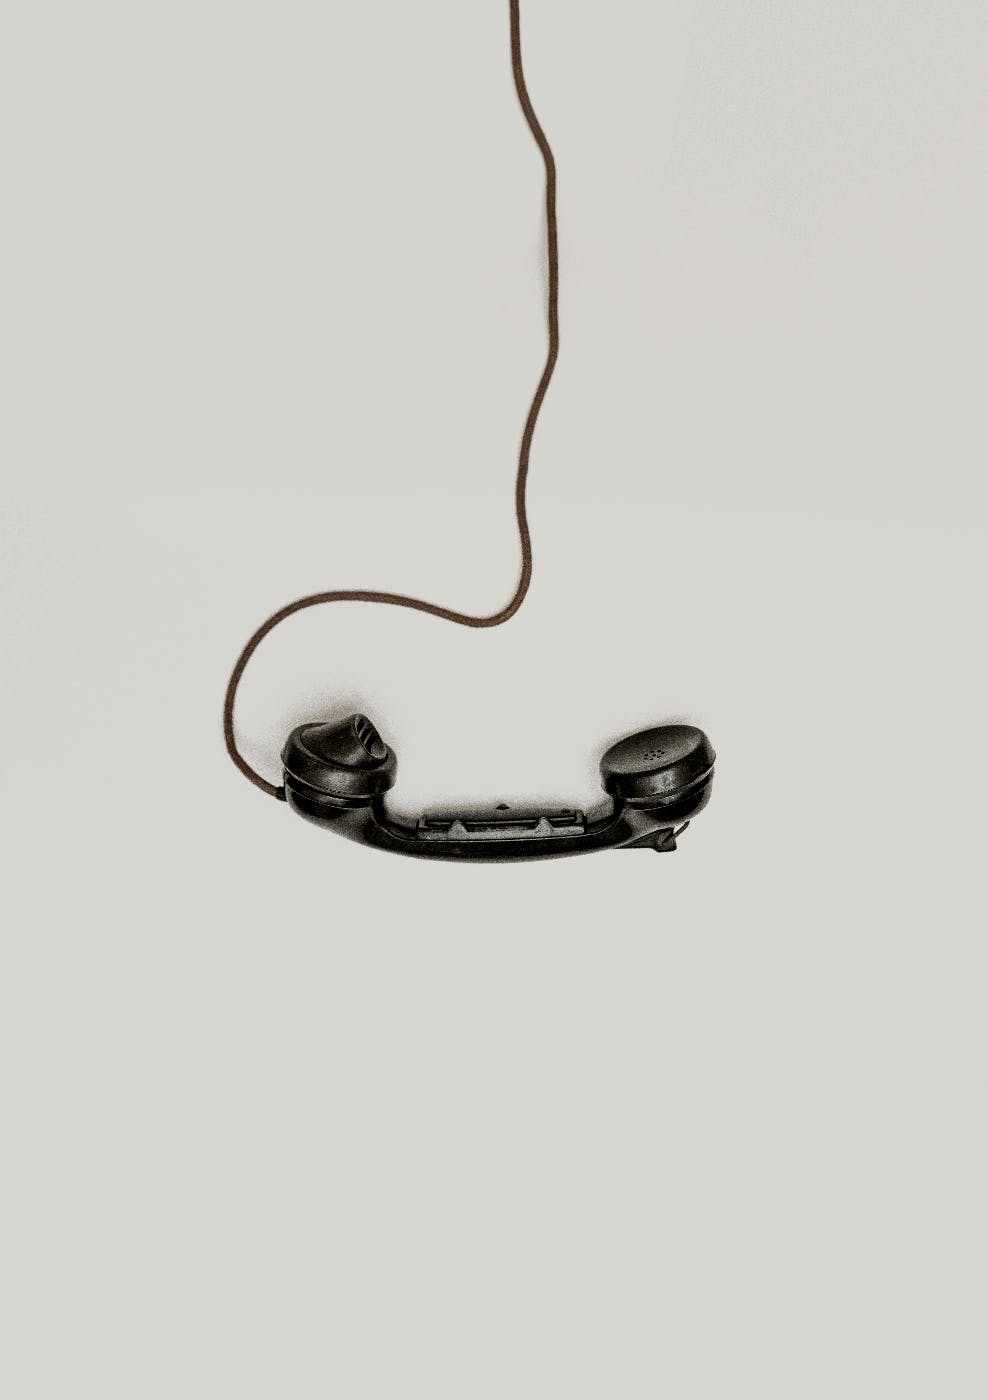 An old fashioned telephone handset in black with a chord running out of frame